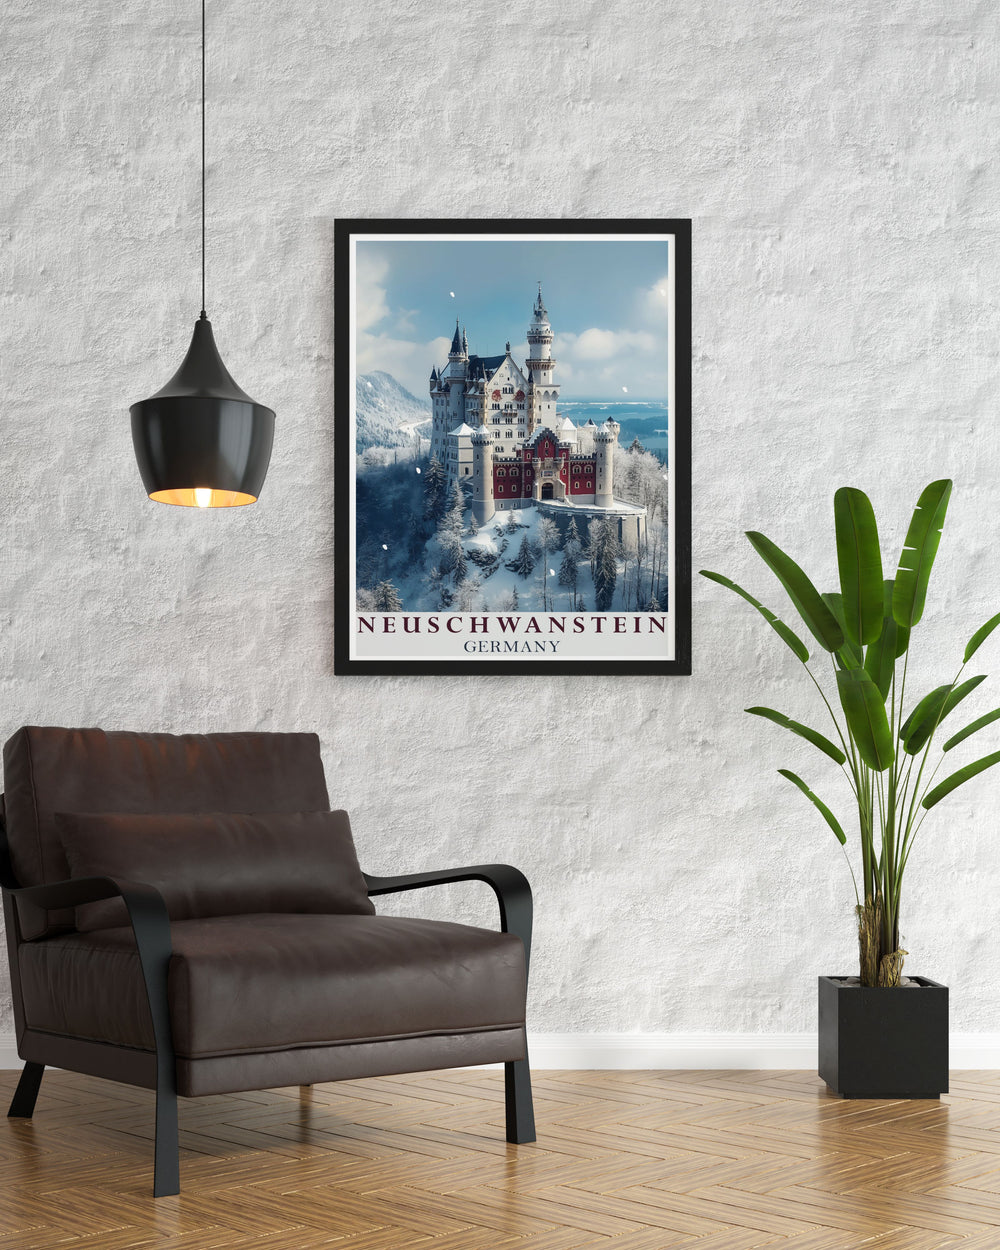 Neuschwanstein Castle prints offering detailed artwork that highlights the castles intricate design. Perfect for art enthusiasts, this black and white fine line print enhances any room decor.